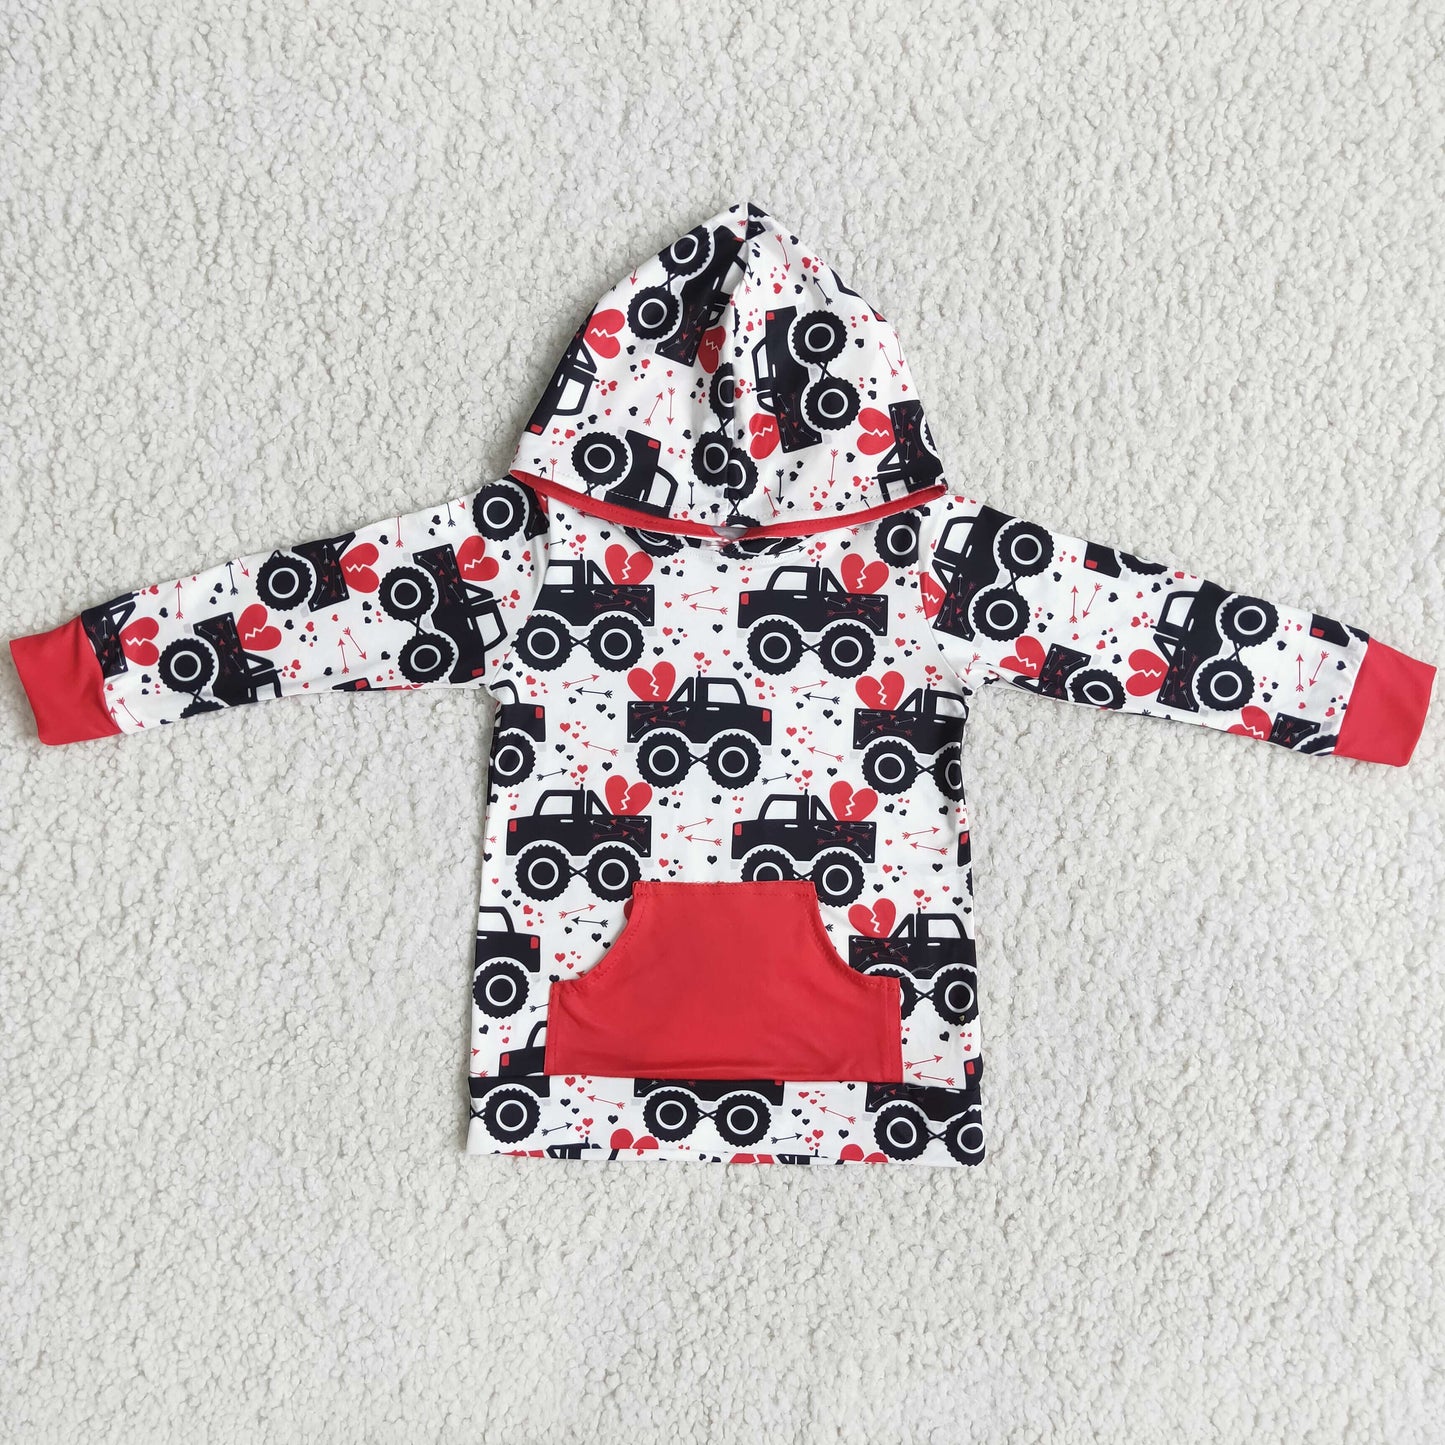 Heart Truck Hoodie Top with Pocket for Valentines